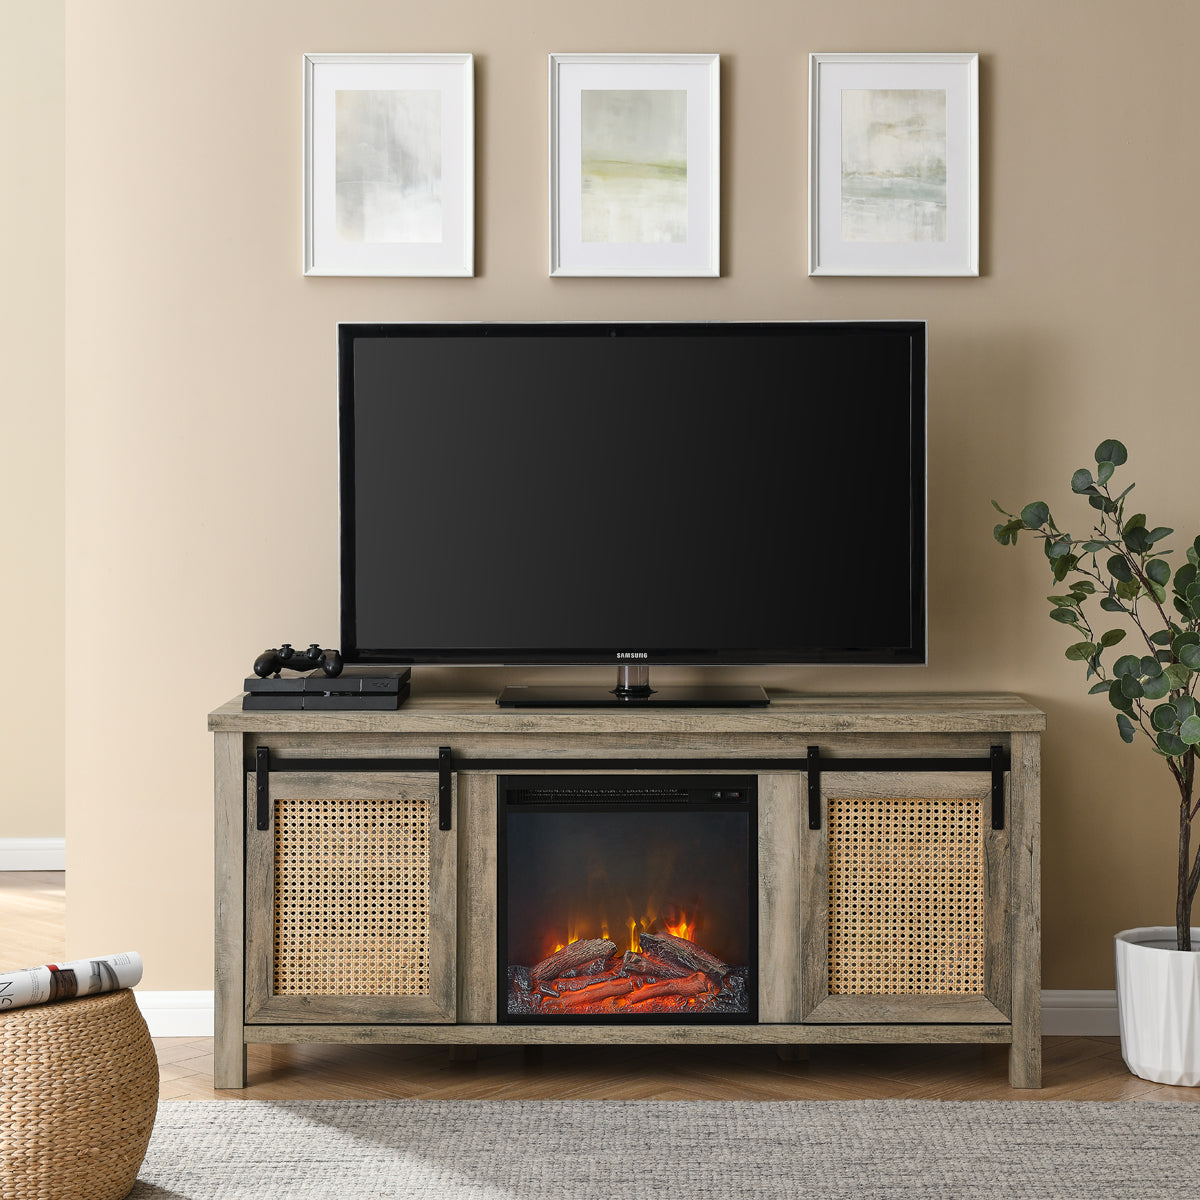 Fireplace TV Stand for TVs up to 65 inches, 58 Inch, Black